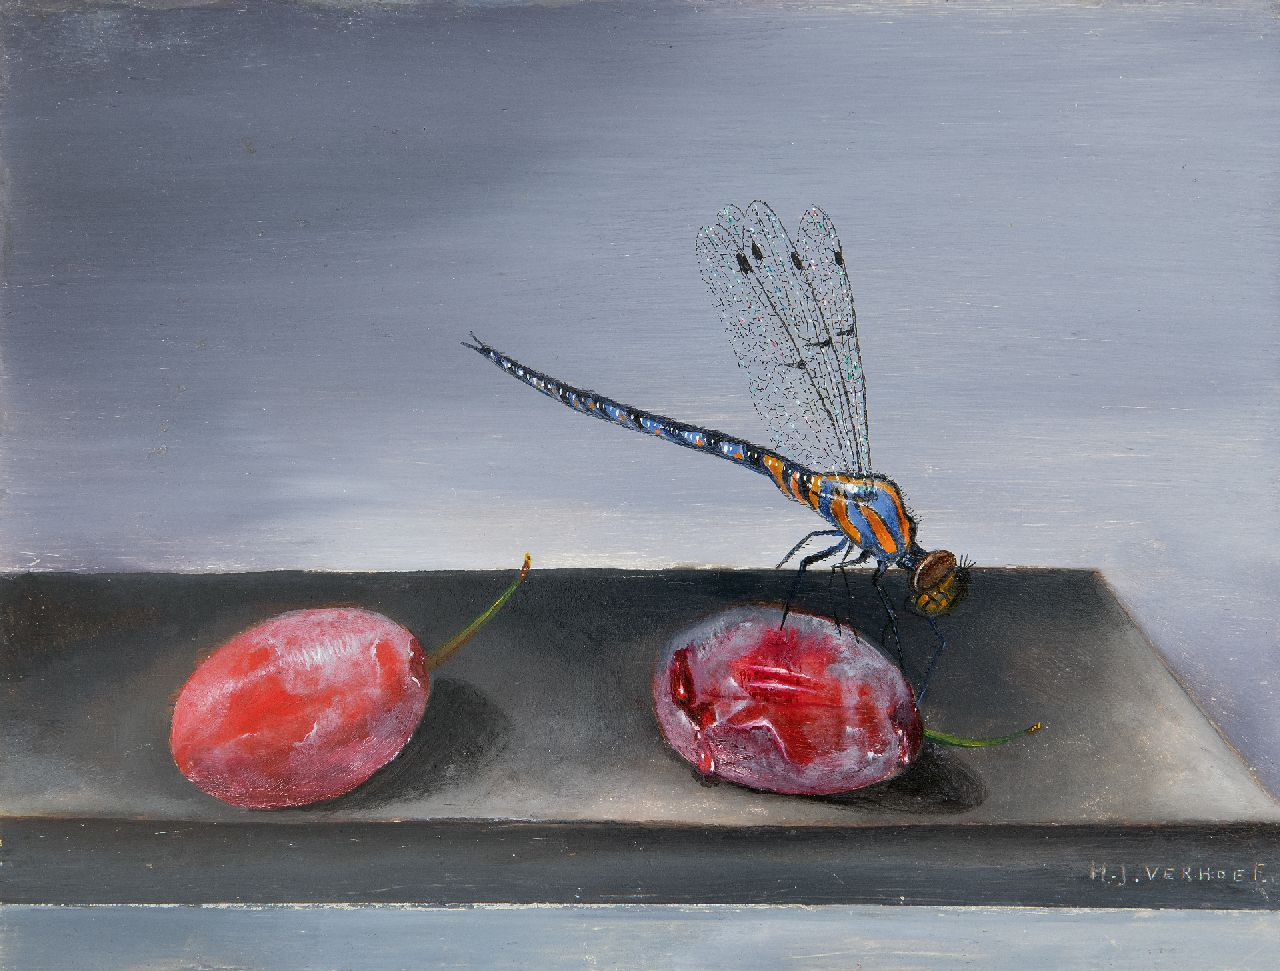 Verhoef H.  | Hans Verhoef | Paintings offered for sale | A dragonfly and red prunes, oil on zinc 16.0 x 21.0 cm, signed l.r.